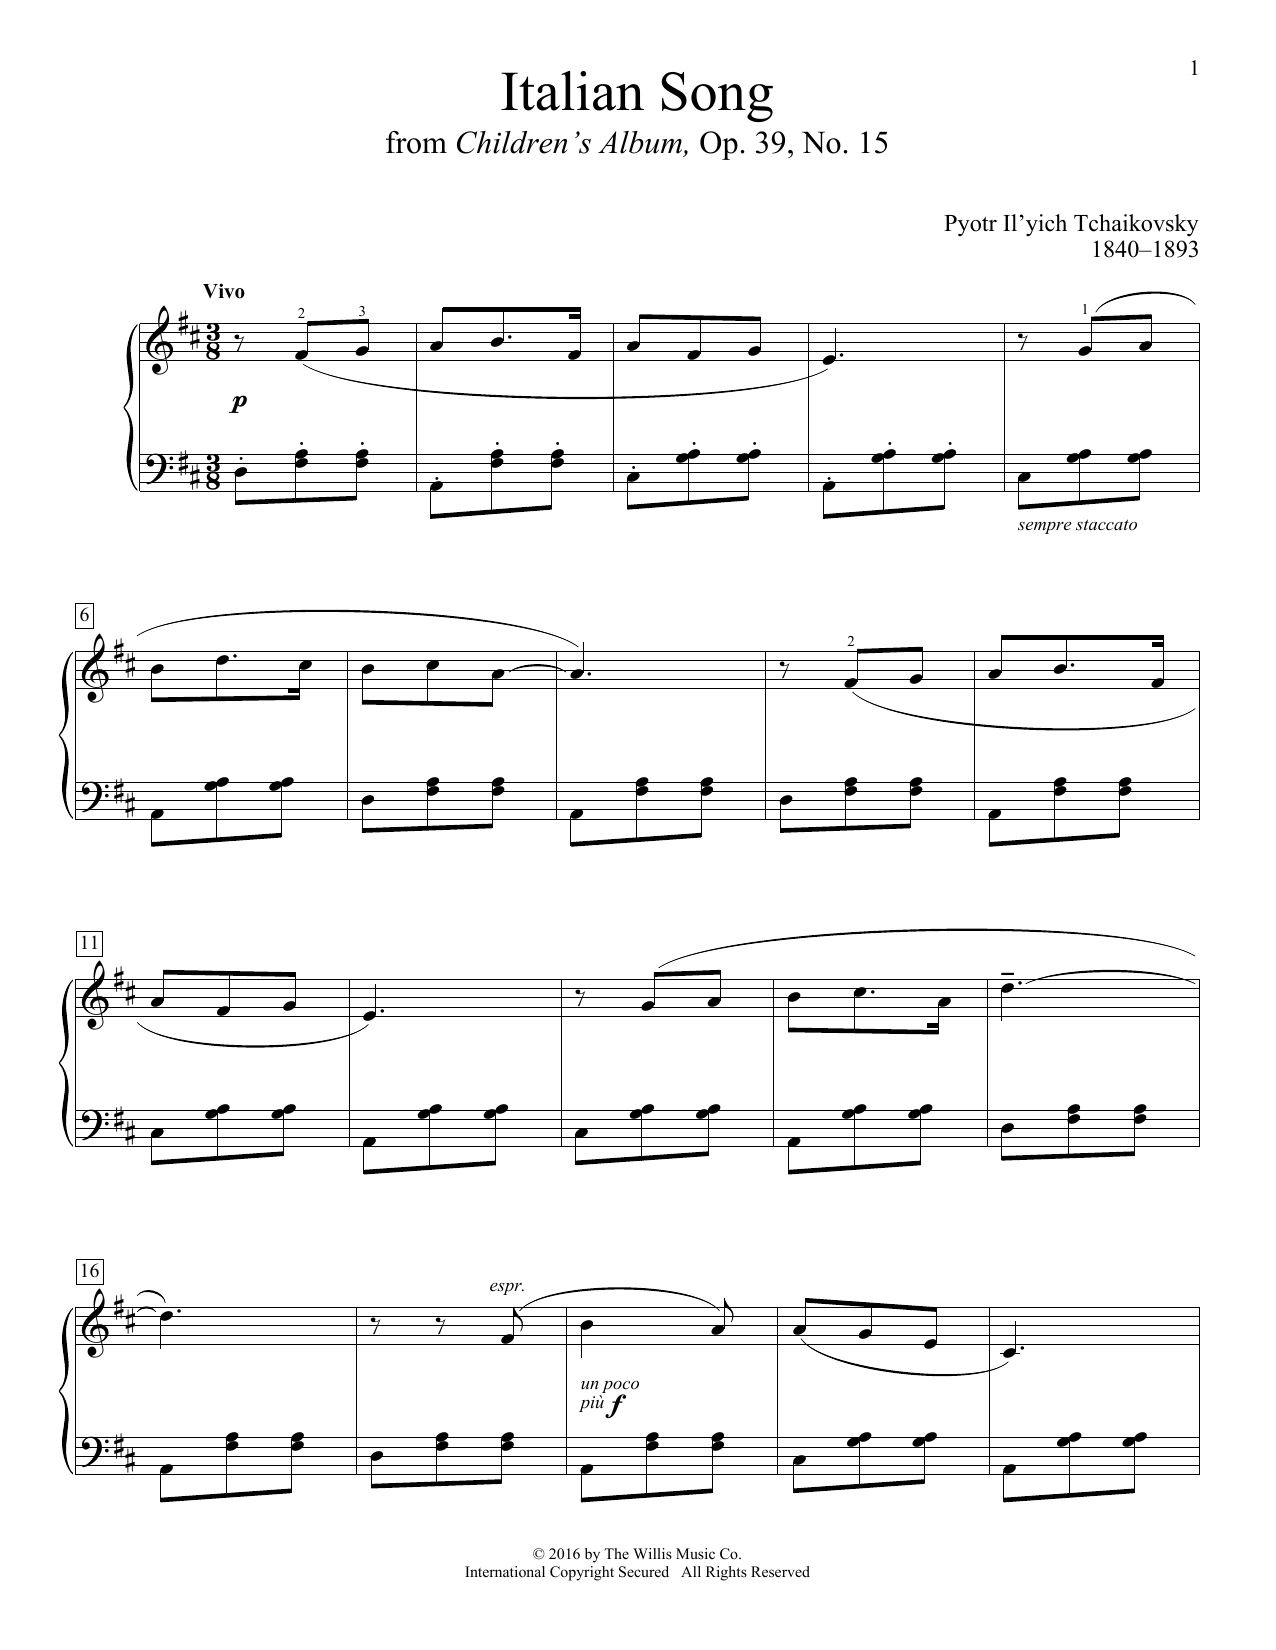 Download Pyotr Il'yich Tchaikovsky Italian Song Sheet Music